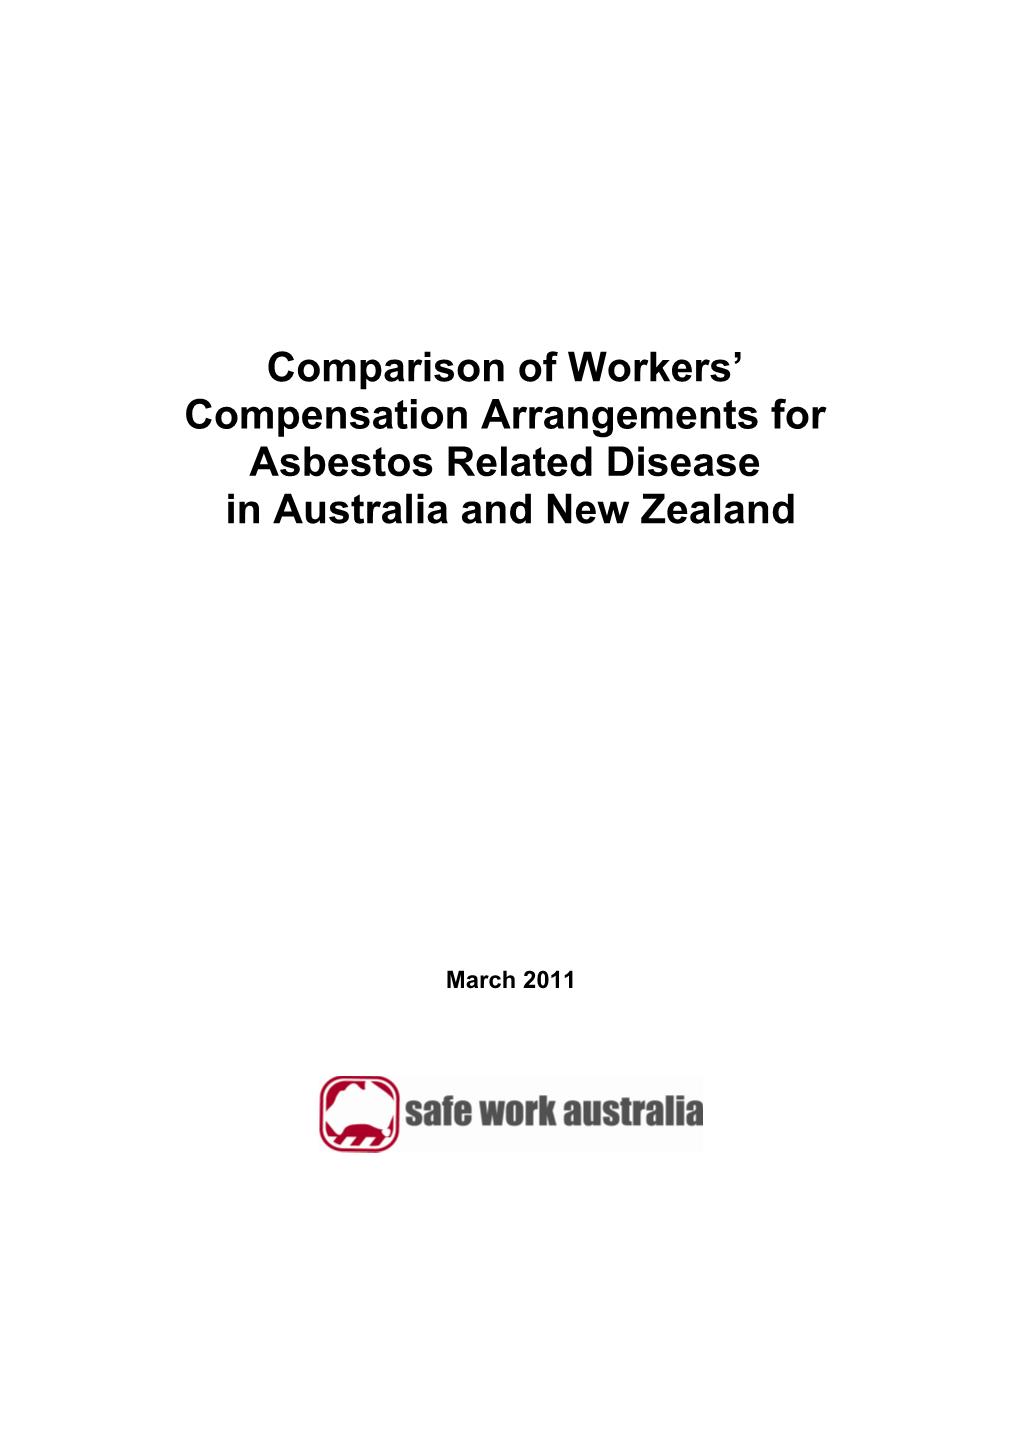 Comparison of Workers' Compensation Arrangements for Asbestos Related Disease in Australia